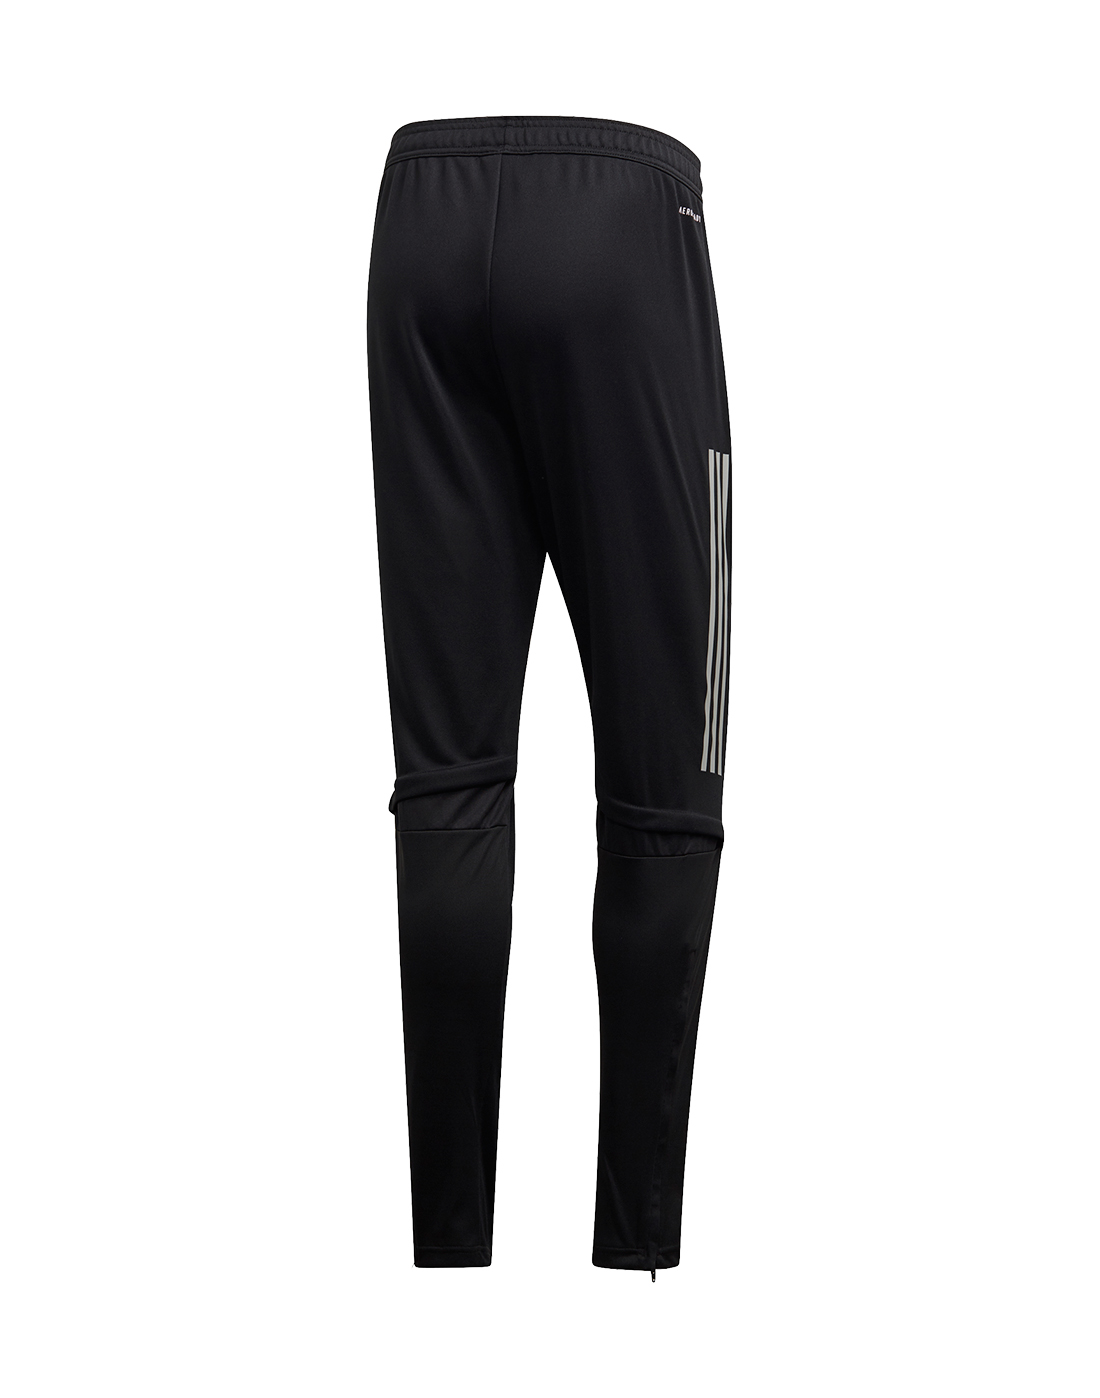 adidas Adult Argentina Pant - Black | Life Style Sports IE